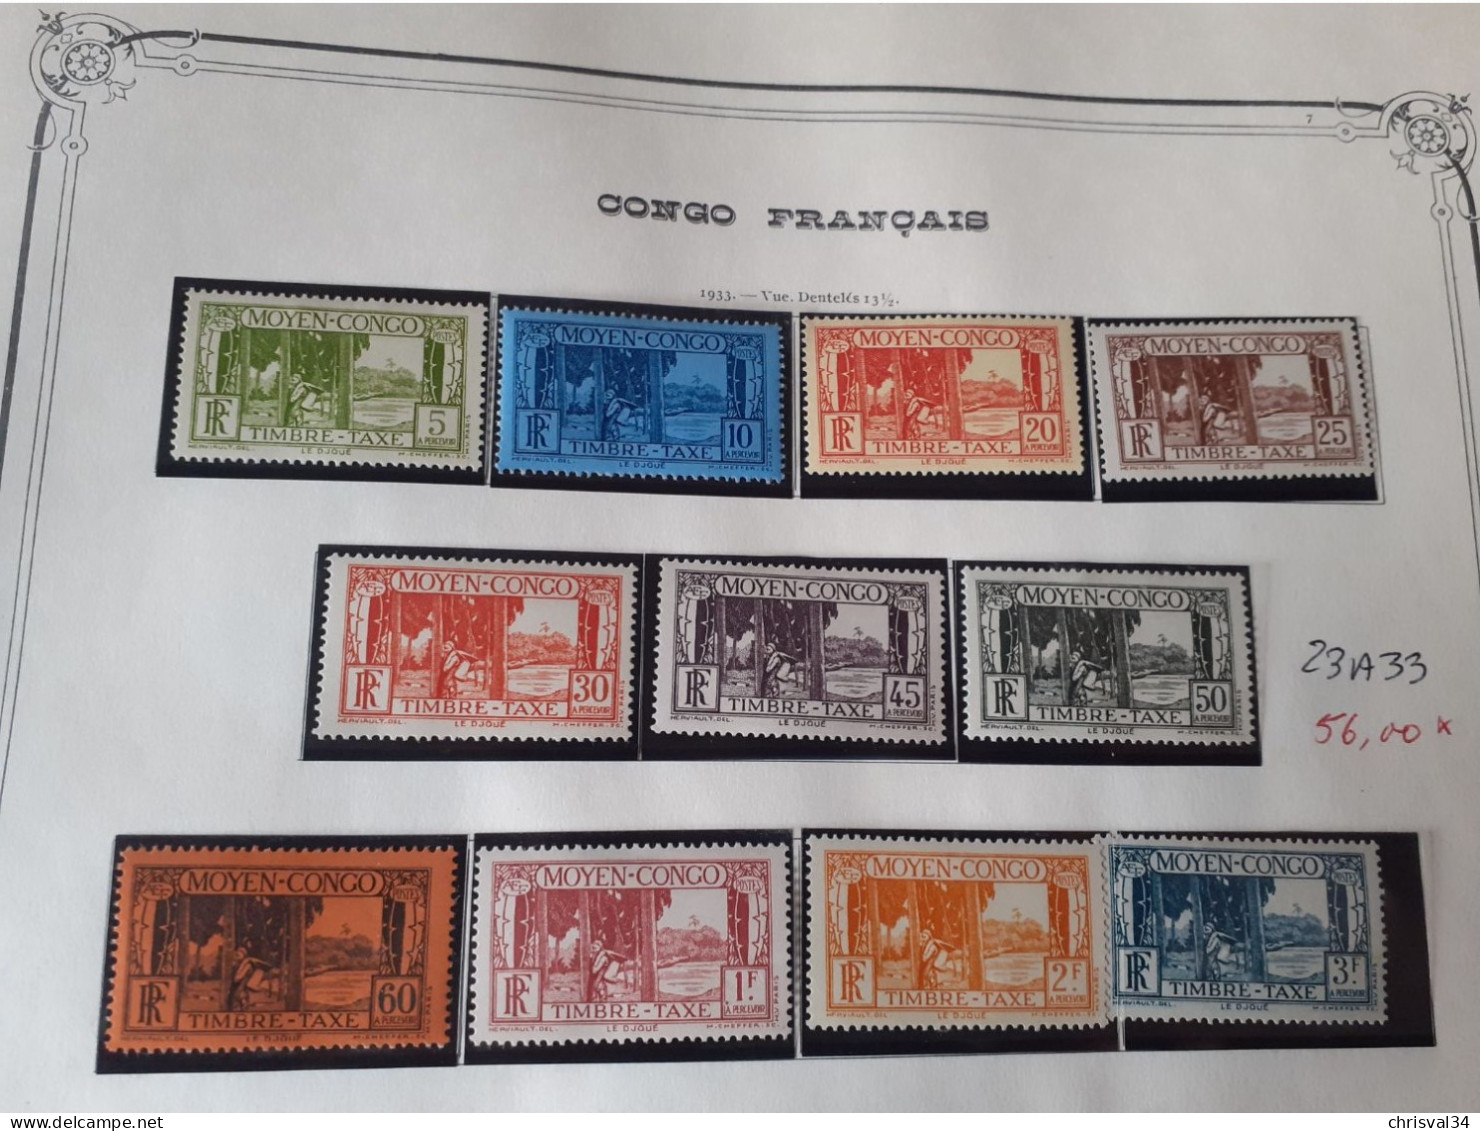 TIMBRES  CONGO SERIE  TAXE   N  23  A  33     COTE  56,00  EUROS    NEUFS  TRACE  CHARNIERES - Neufs